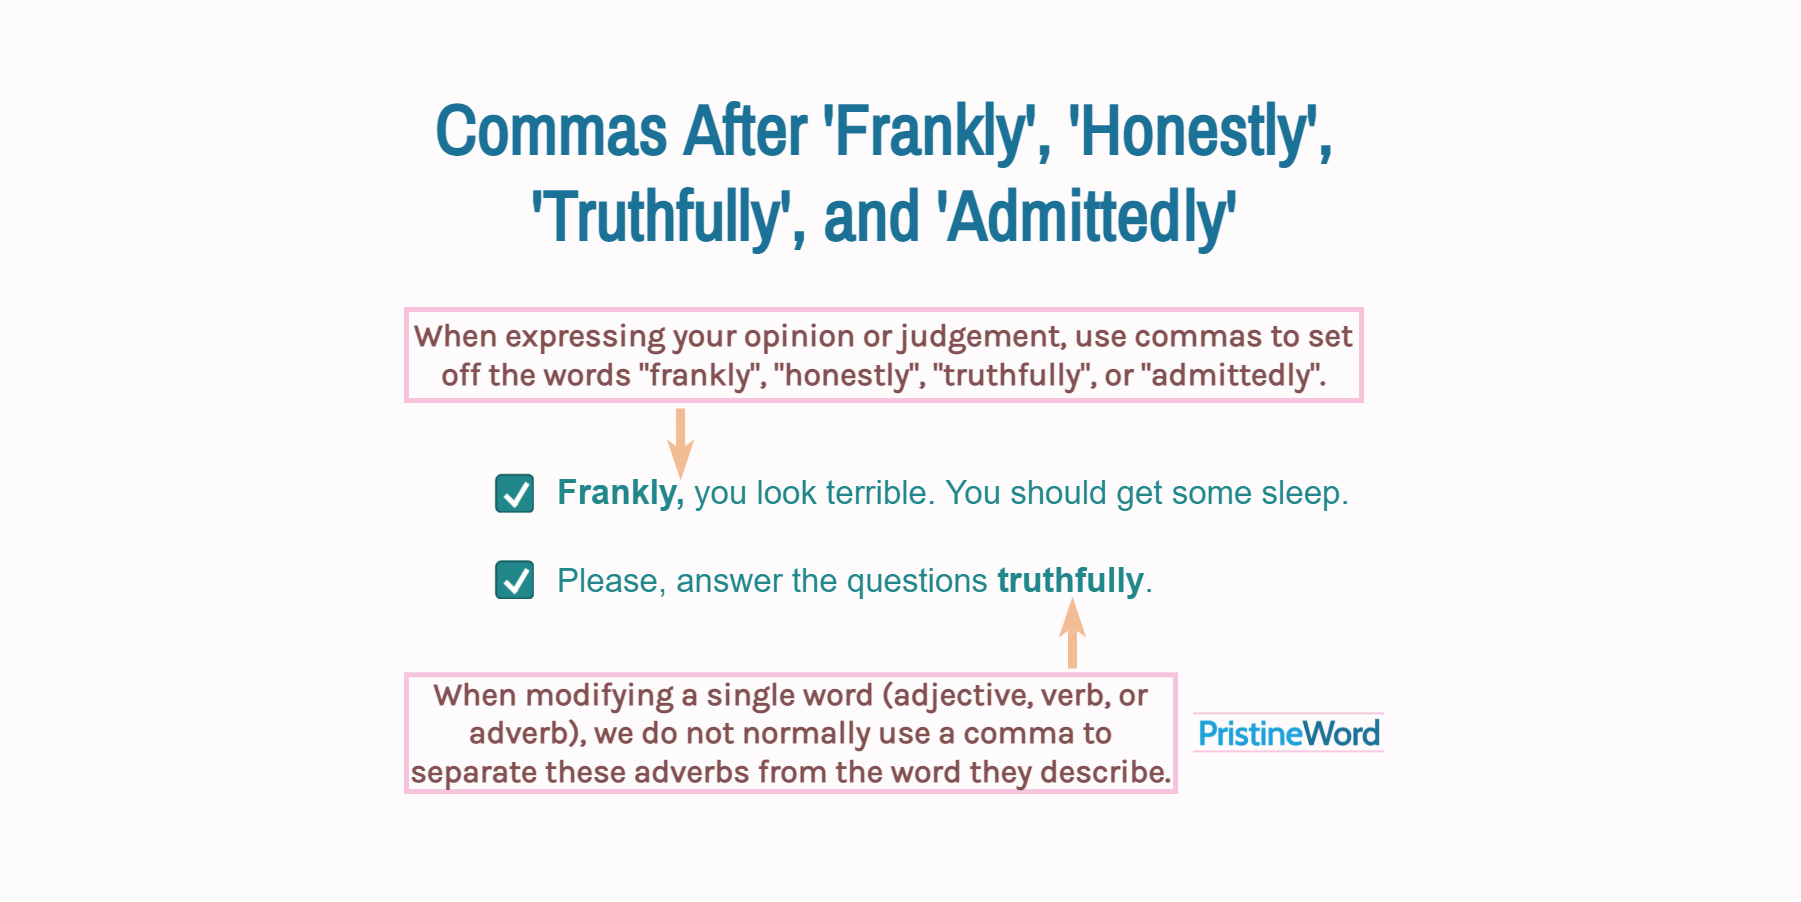 Commas After 'Frankly', 'Honestly', 'Truthfully', and 'Admittedly'